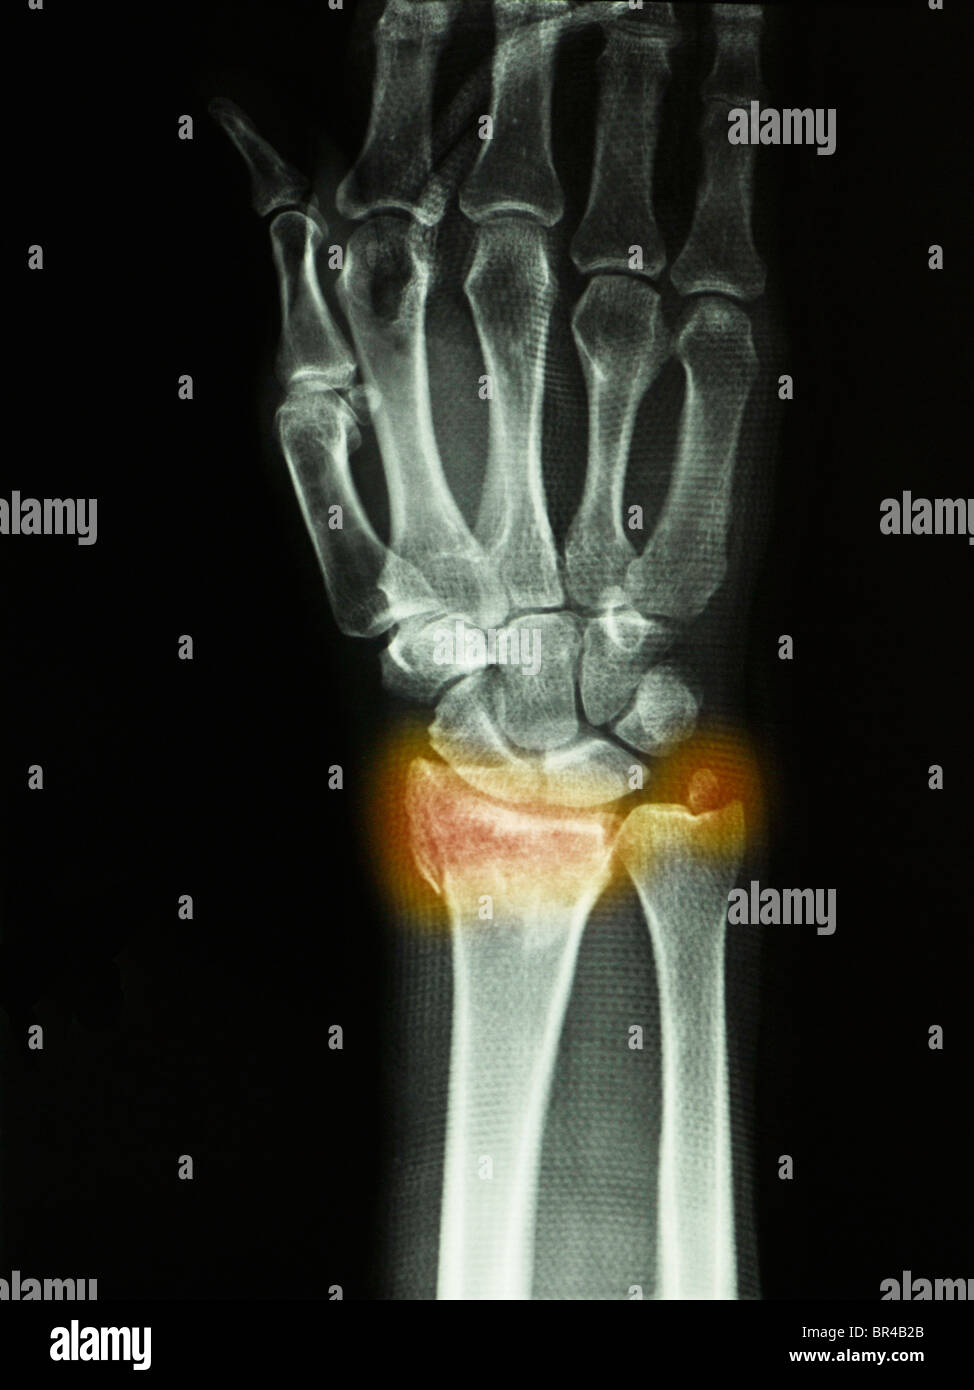 Distal radius and ulnar styloid fracture in a 43 year old man. Stock Photo